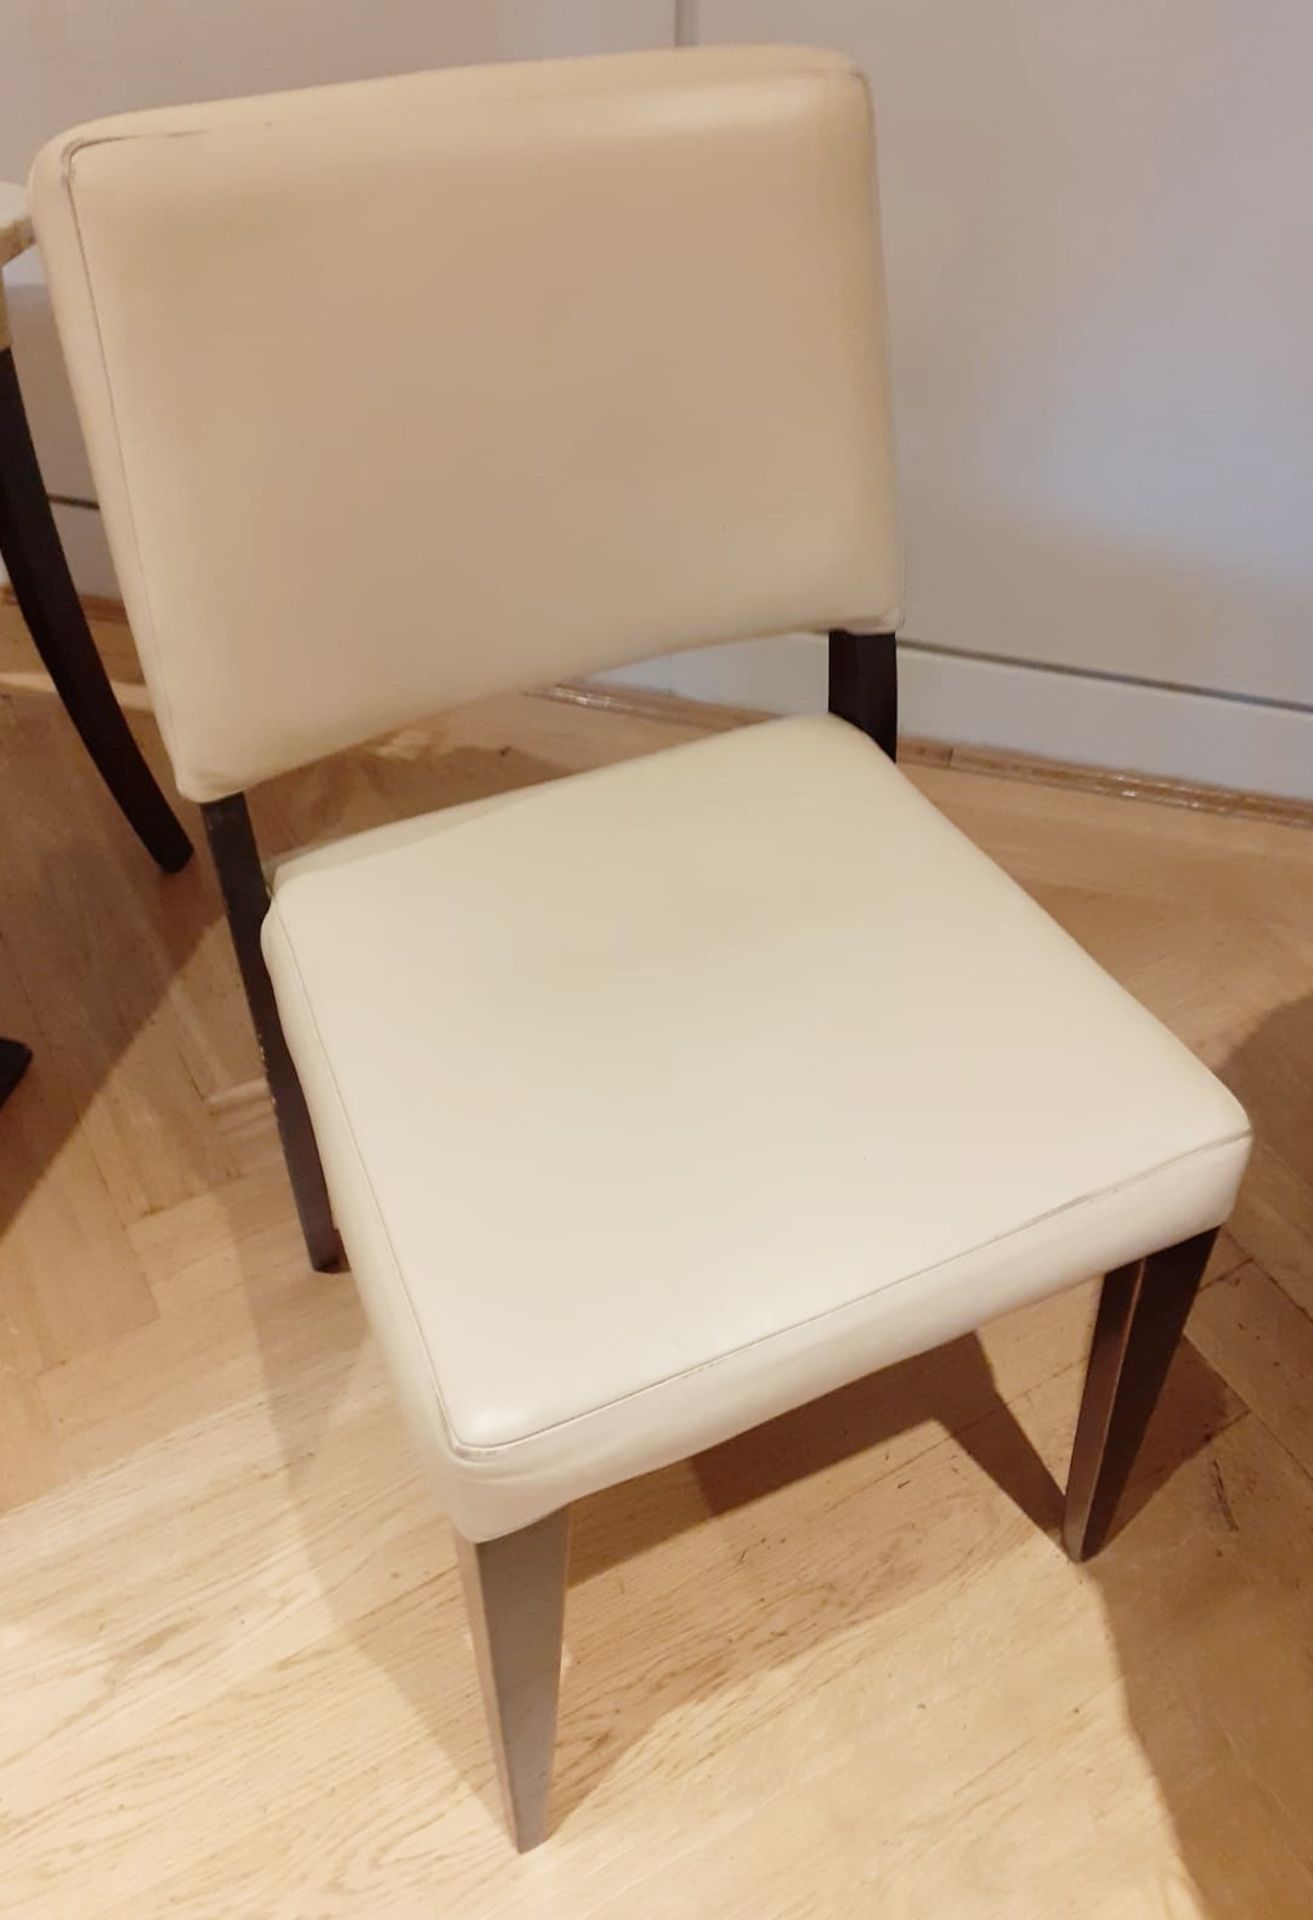 22 x Cream Leather Upholstered Restaurant Dining Chairs With Sturdy Wooden Frames - Ref: CAM527/A - Image 5 of 10